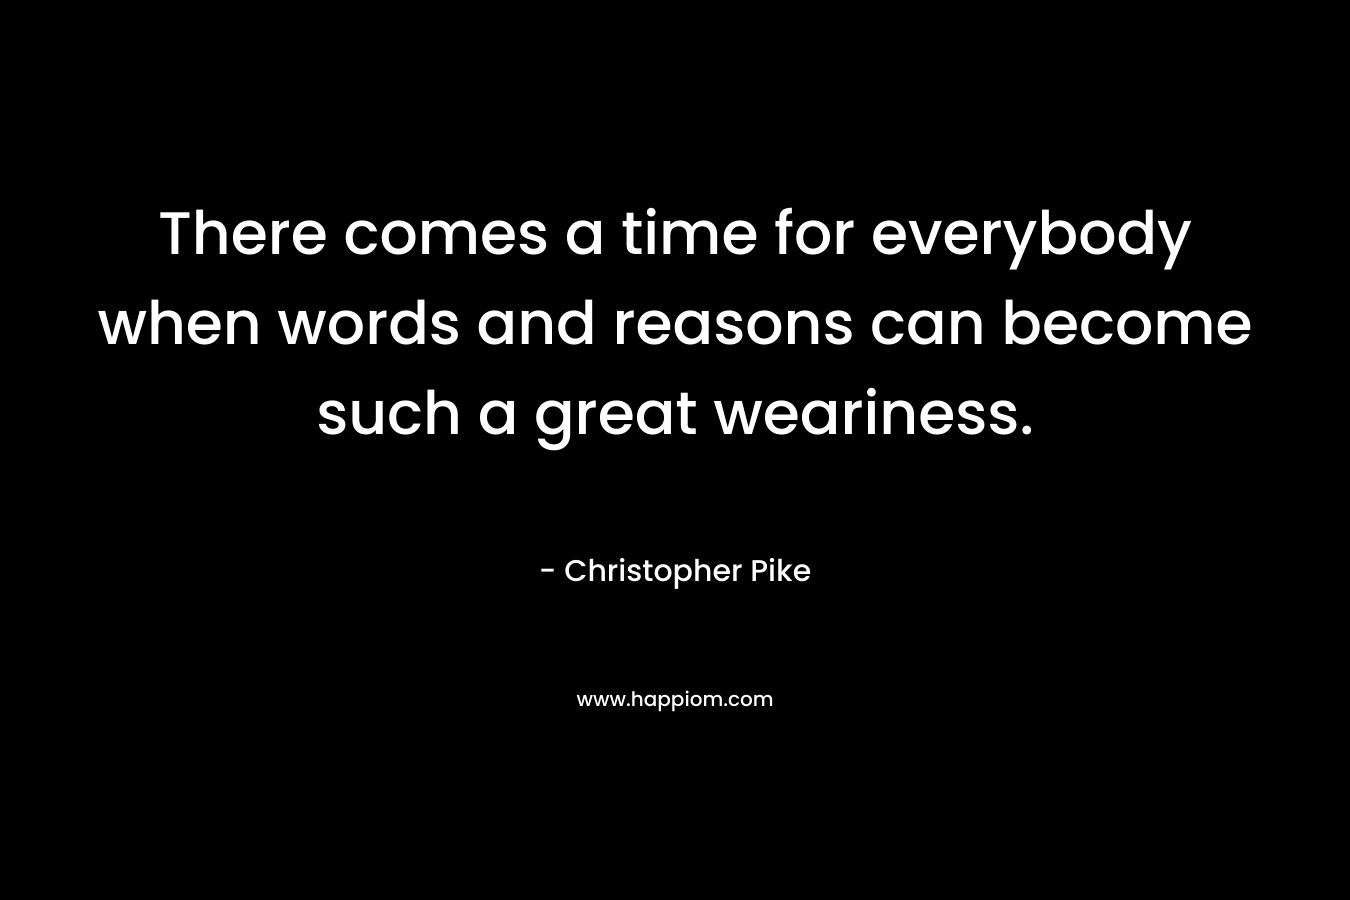 There comes a time for everybody when words and reasons can become such a great weariness. – Christopher Pike